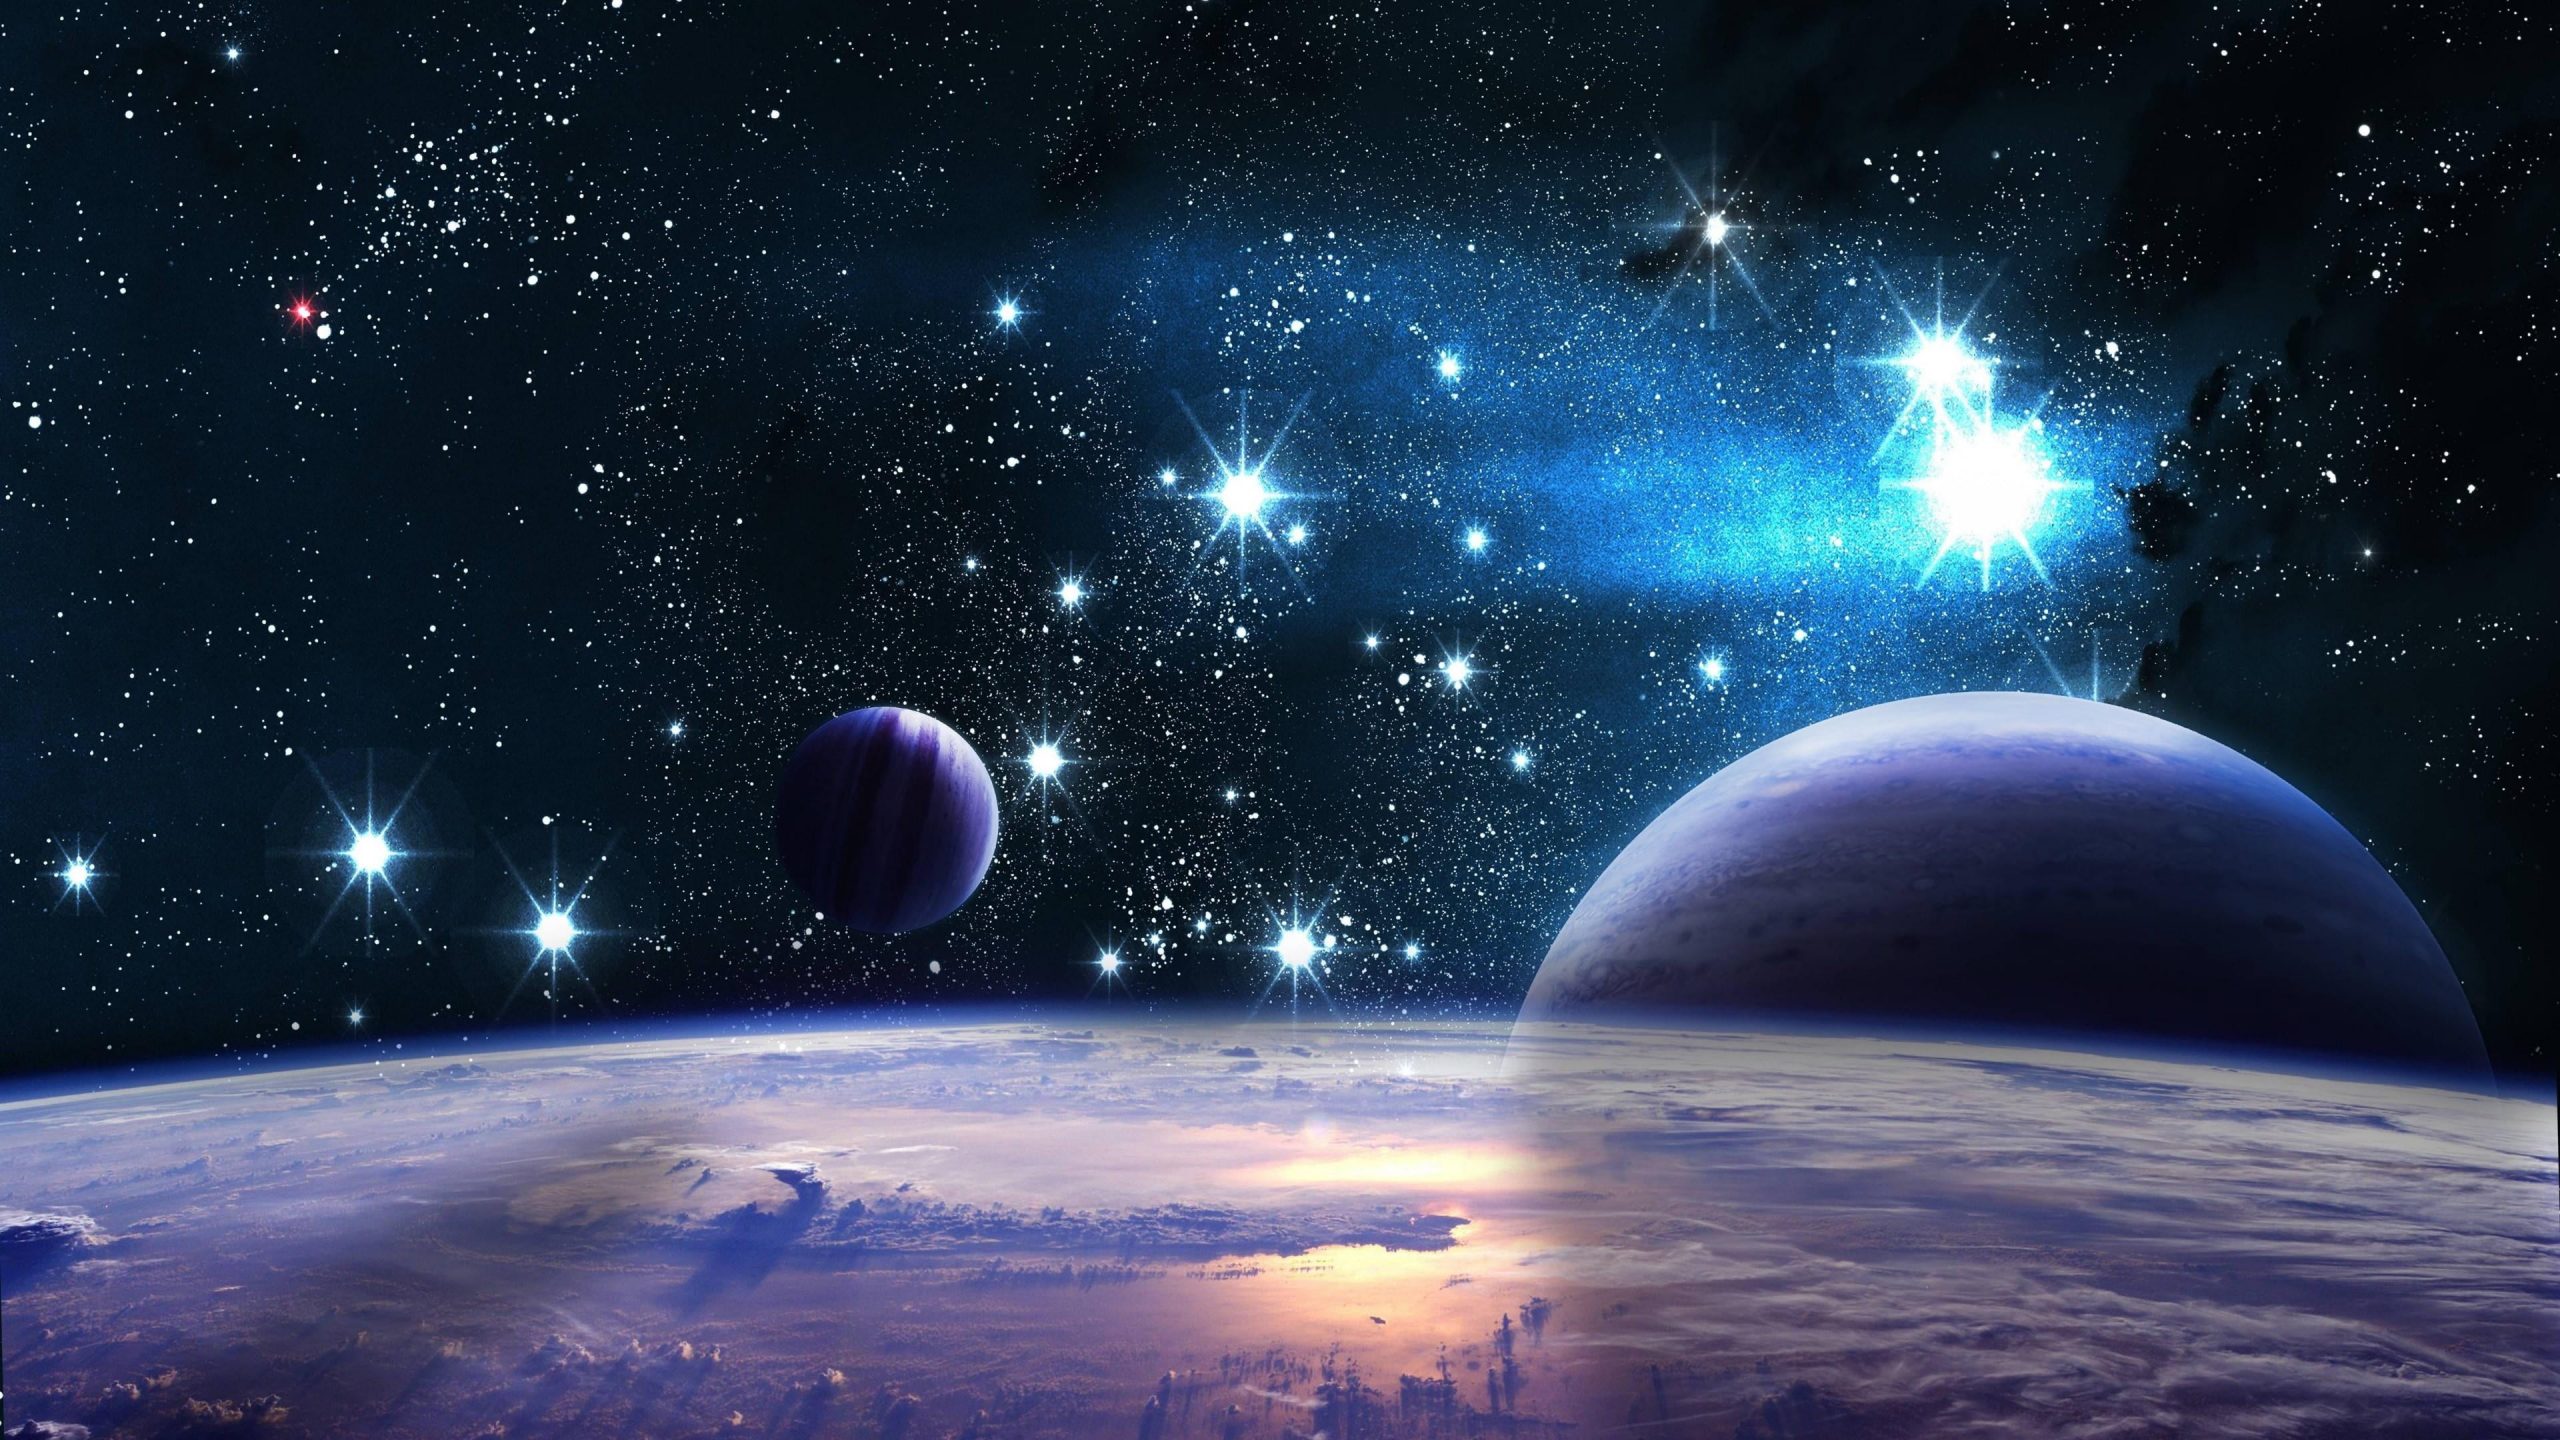 Space art wallpaper, fantasy art, outer space, sky, earth, exoplanet